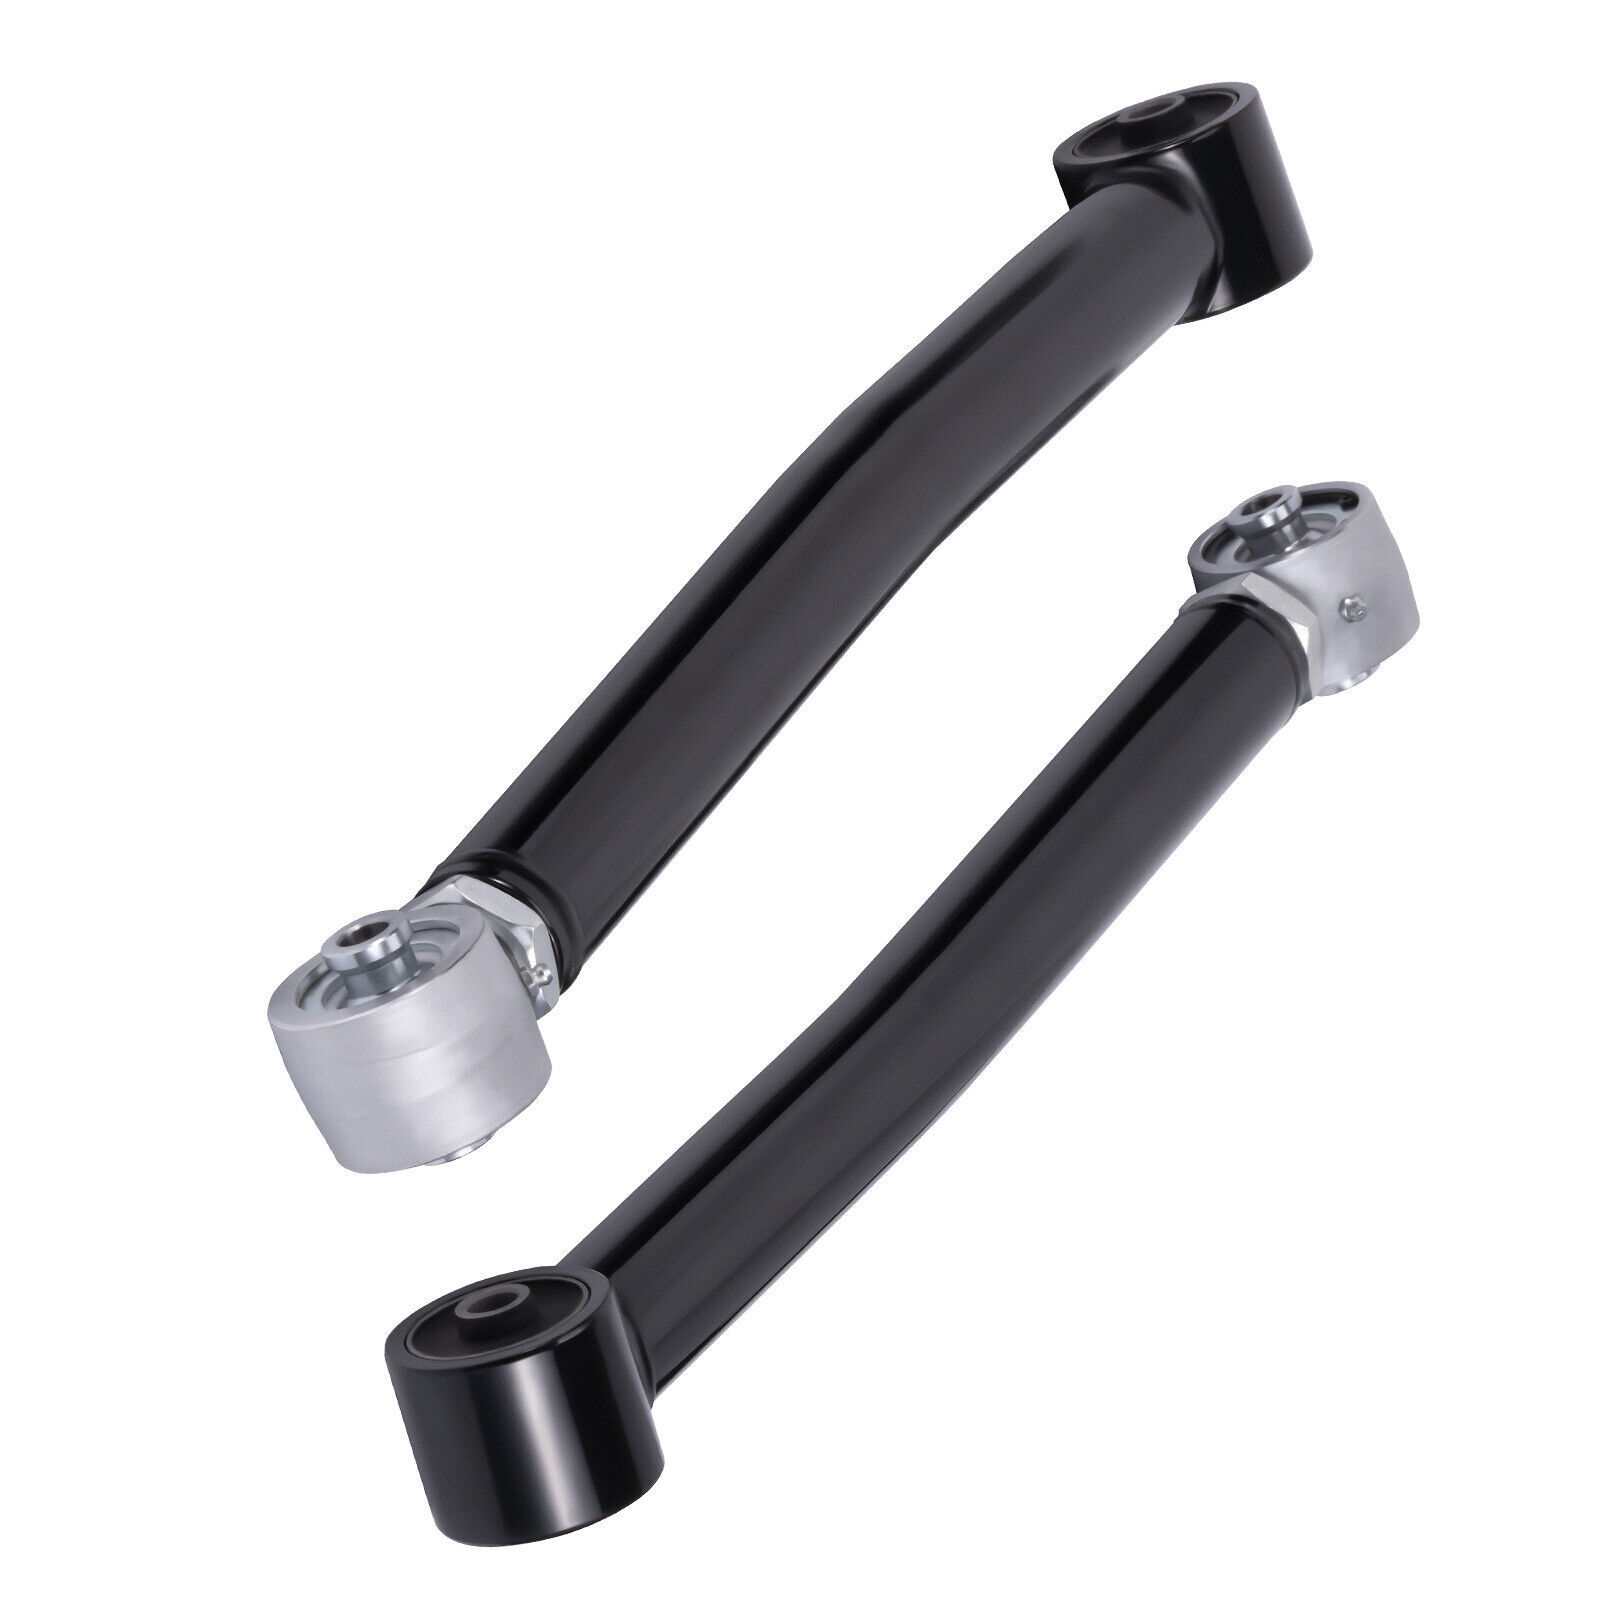 2x Front Lower Adjustable Control Arms 0-4" Lift For Jeep Wrangler JK 07-18 4WD - $131.35